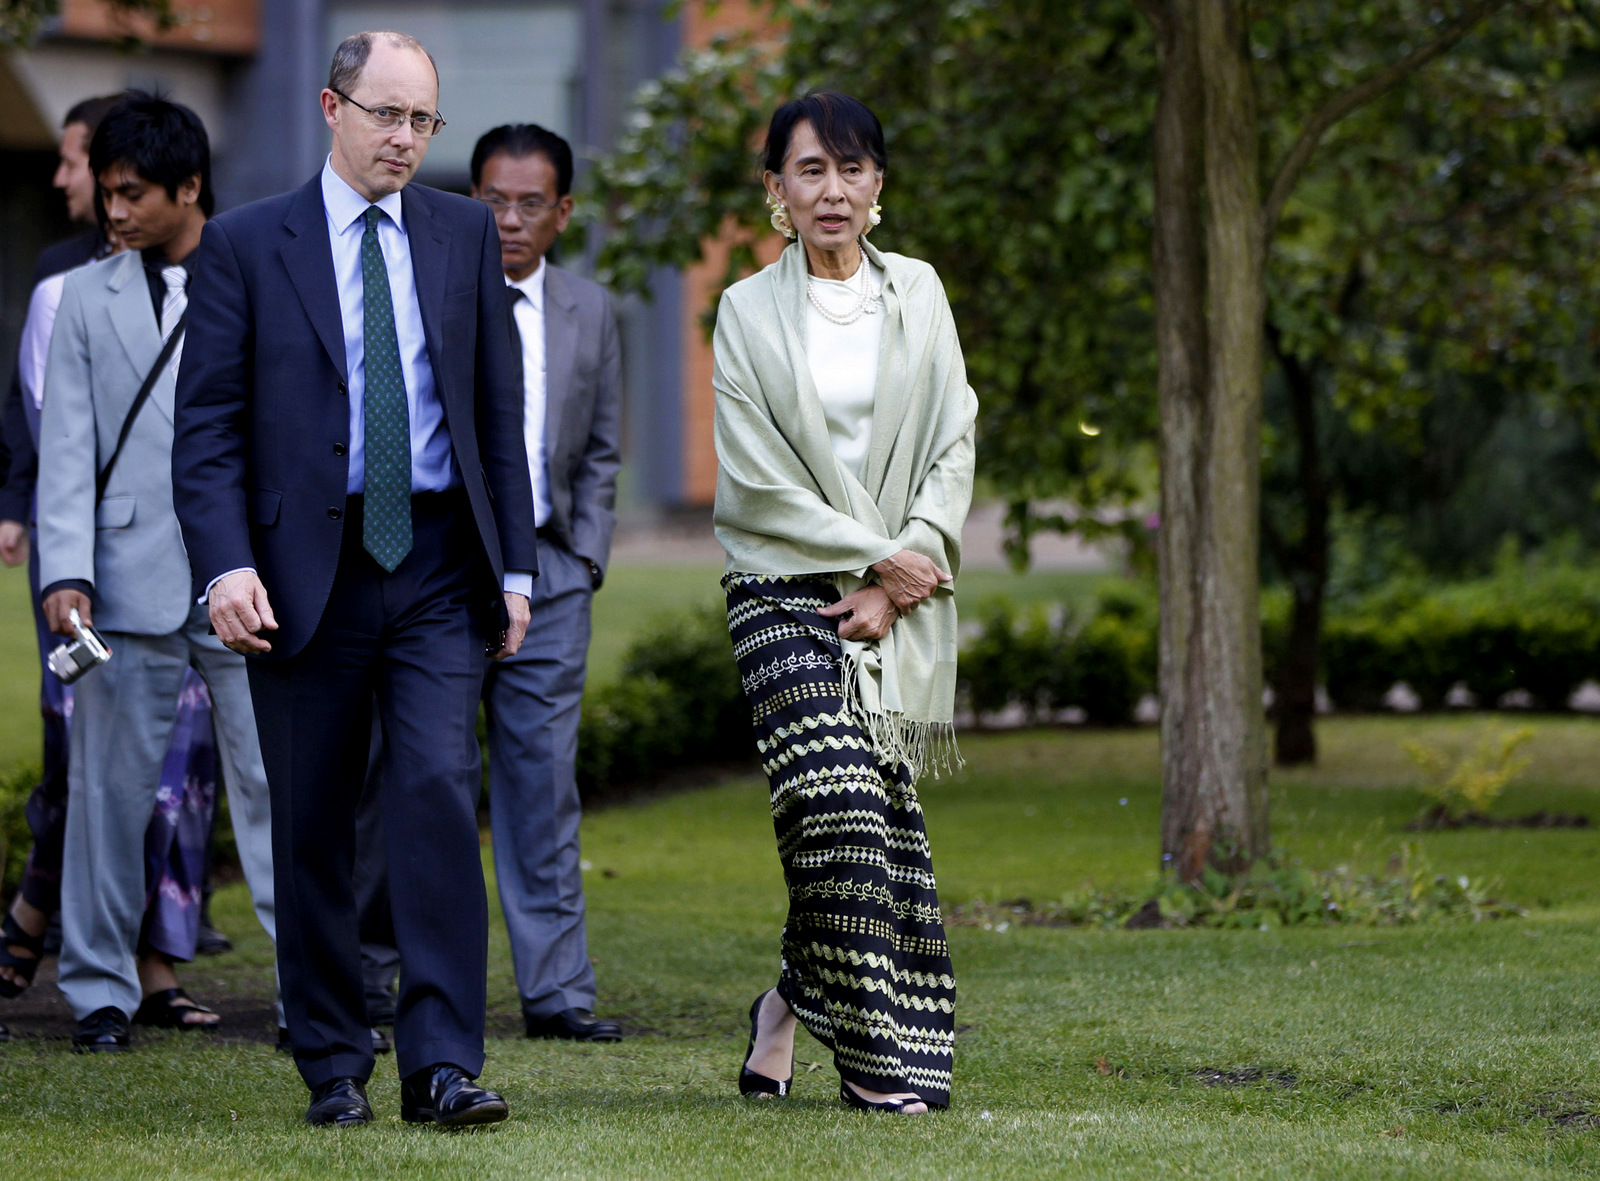 Myanmar opposition leader Aung San Suu Kyi, center, walks with Andrew Dilnot, left, the Principal of St Hugh’s College of the Oxford University as she arrives at a reception in Oxford, England, June 19, 2012. (AP/Lefteris Pitarakis)